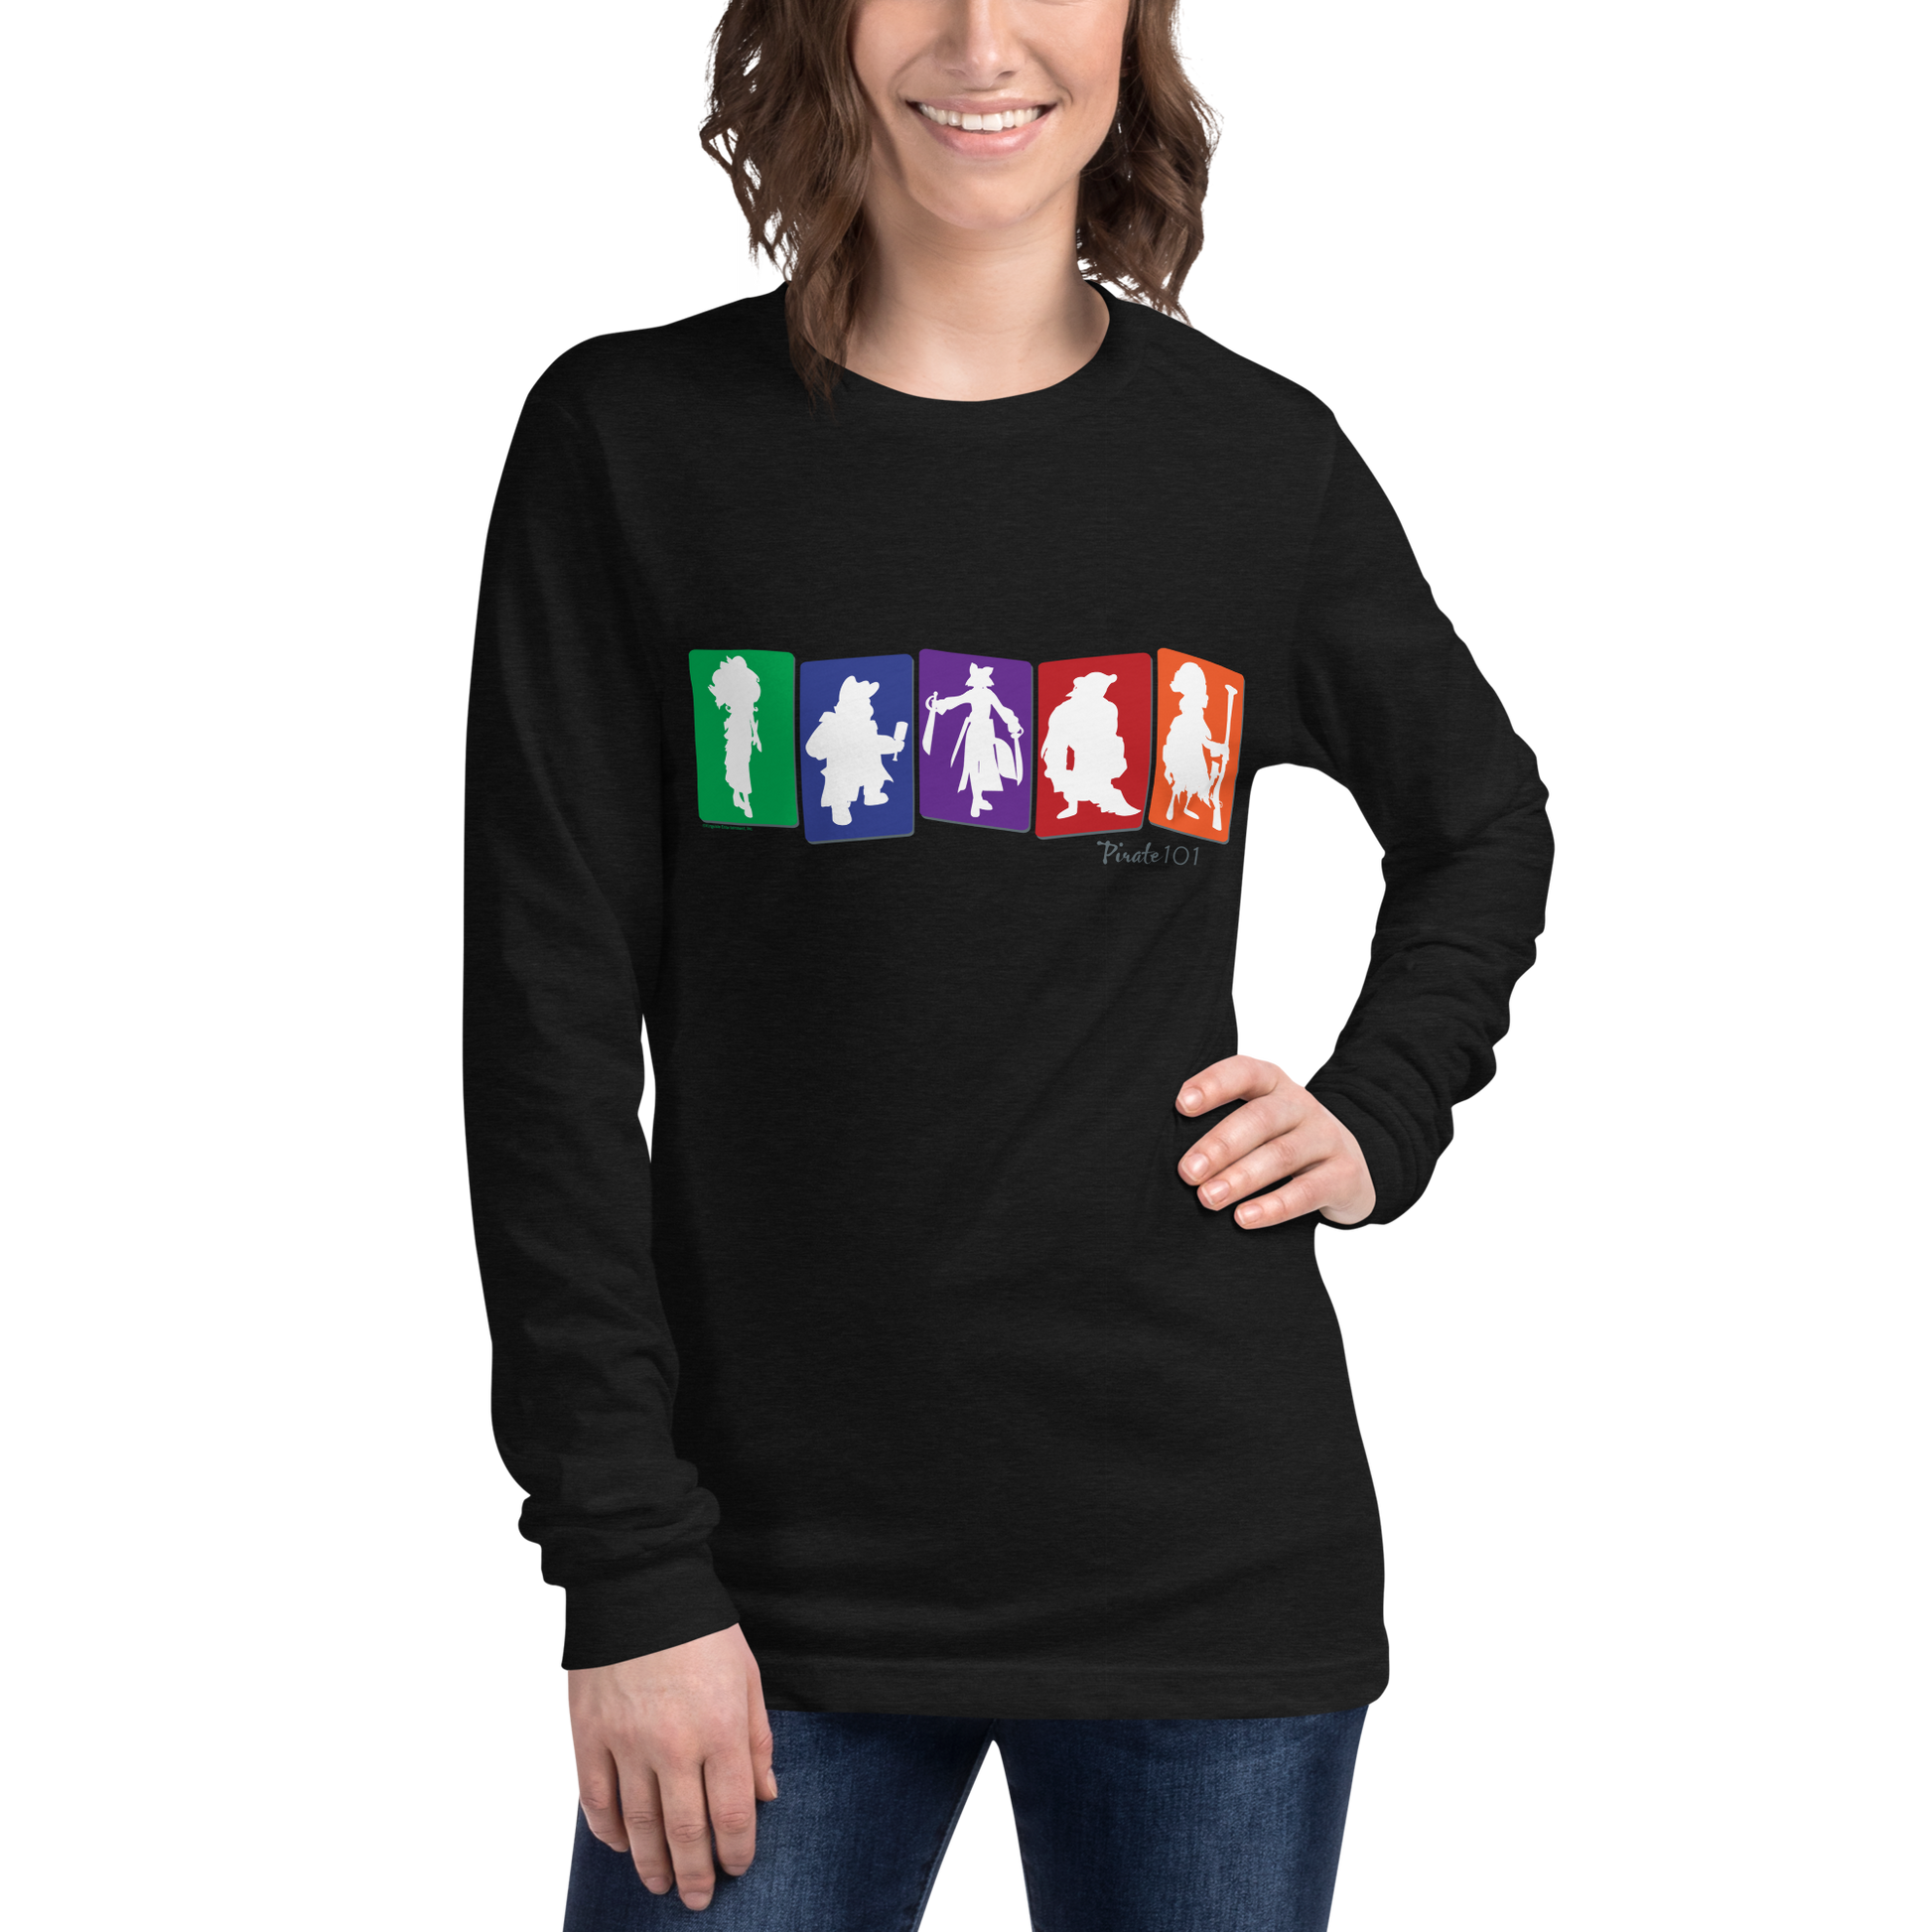 Pirate101-Class-Banner-Icon-Unisex-Graphic-Long-Sleeve-Shirt3-witchdoctor-privateer-swashbuckler-musketeer-buccaneer